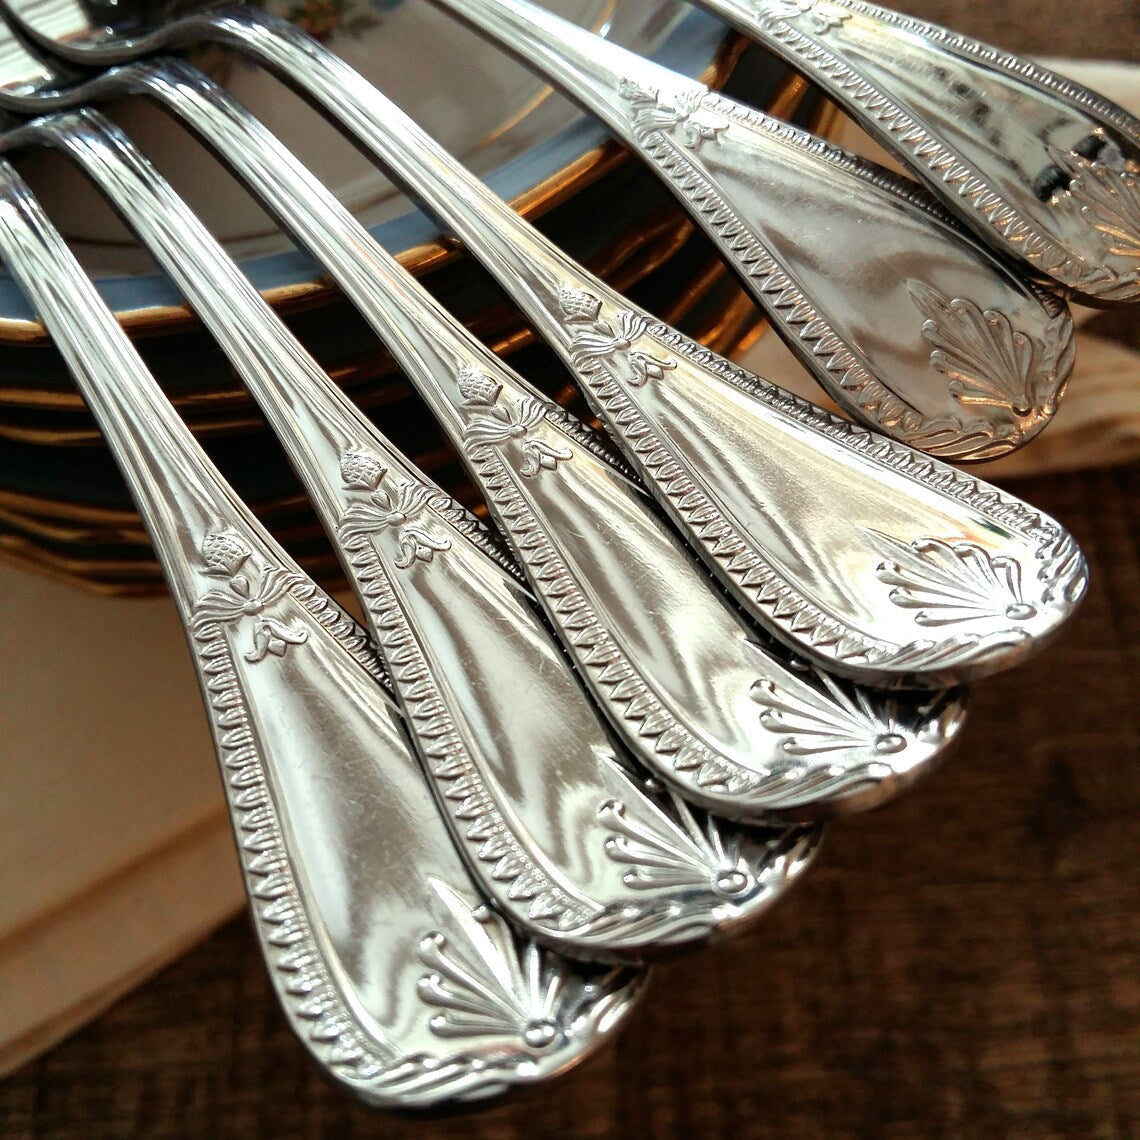 Seven Hallmarked Pastry Forks. Cake Forks from Tiggy & Pip - Just €49! Shop now at Tiggy and Pip